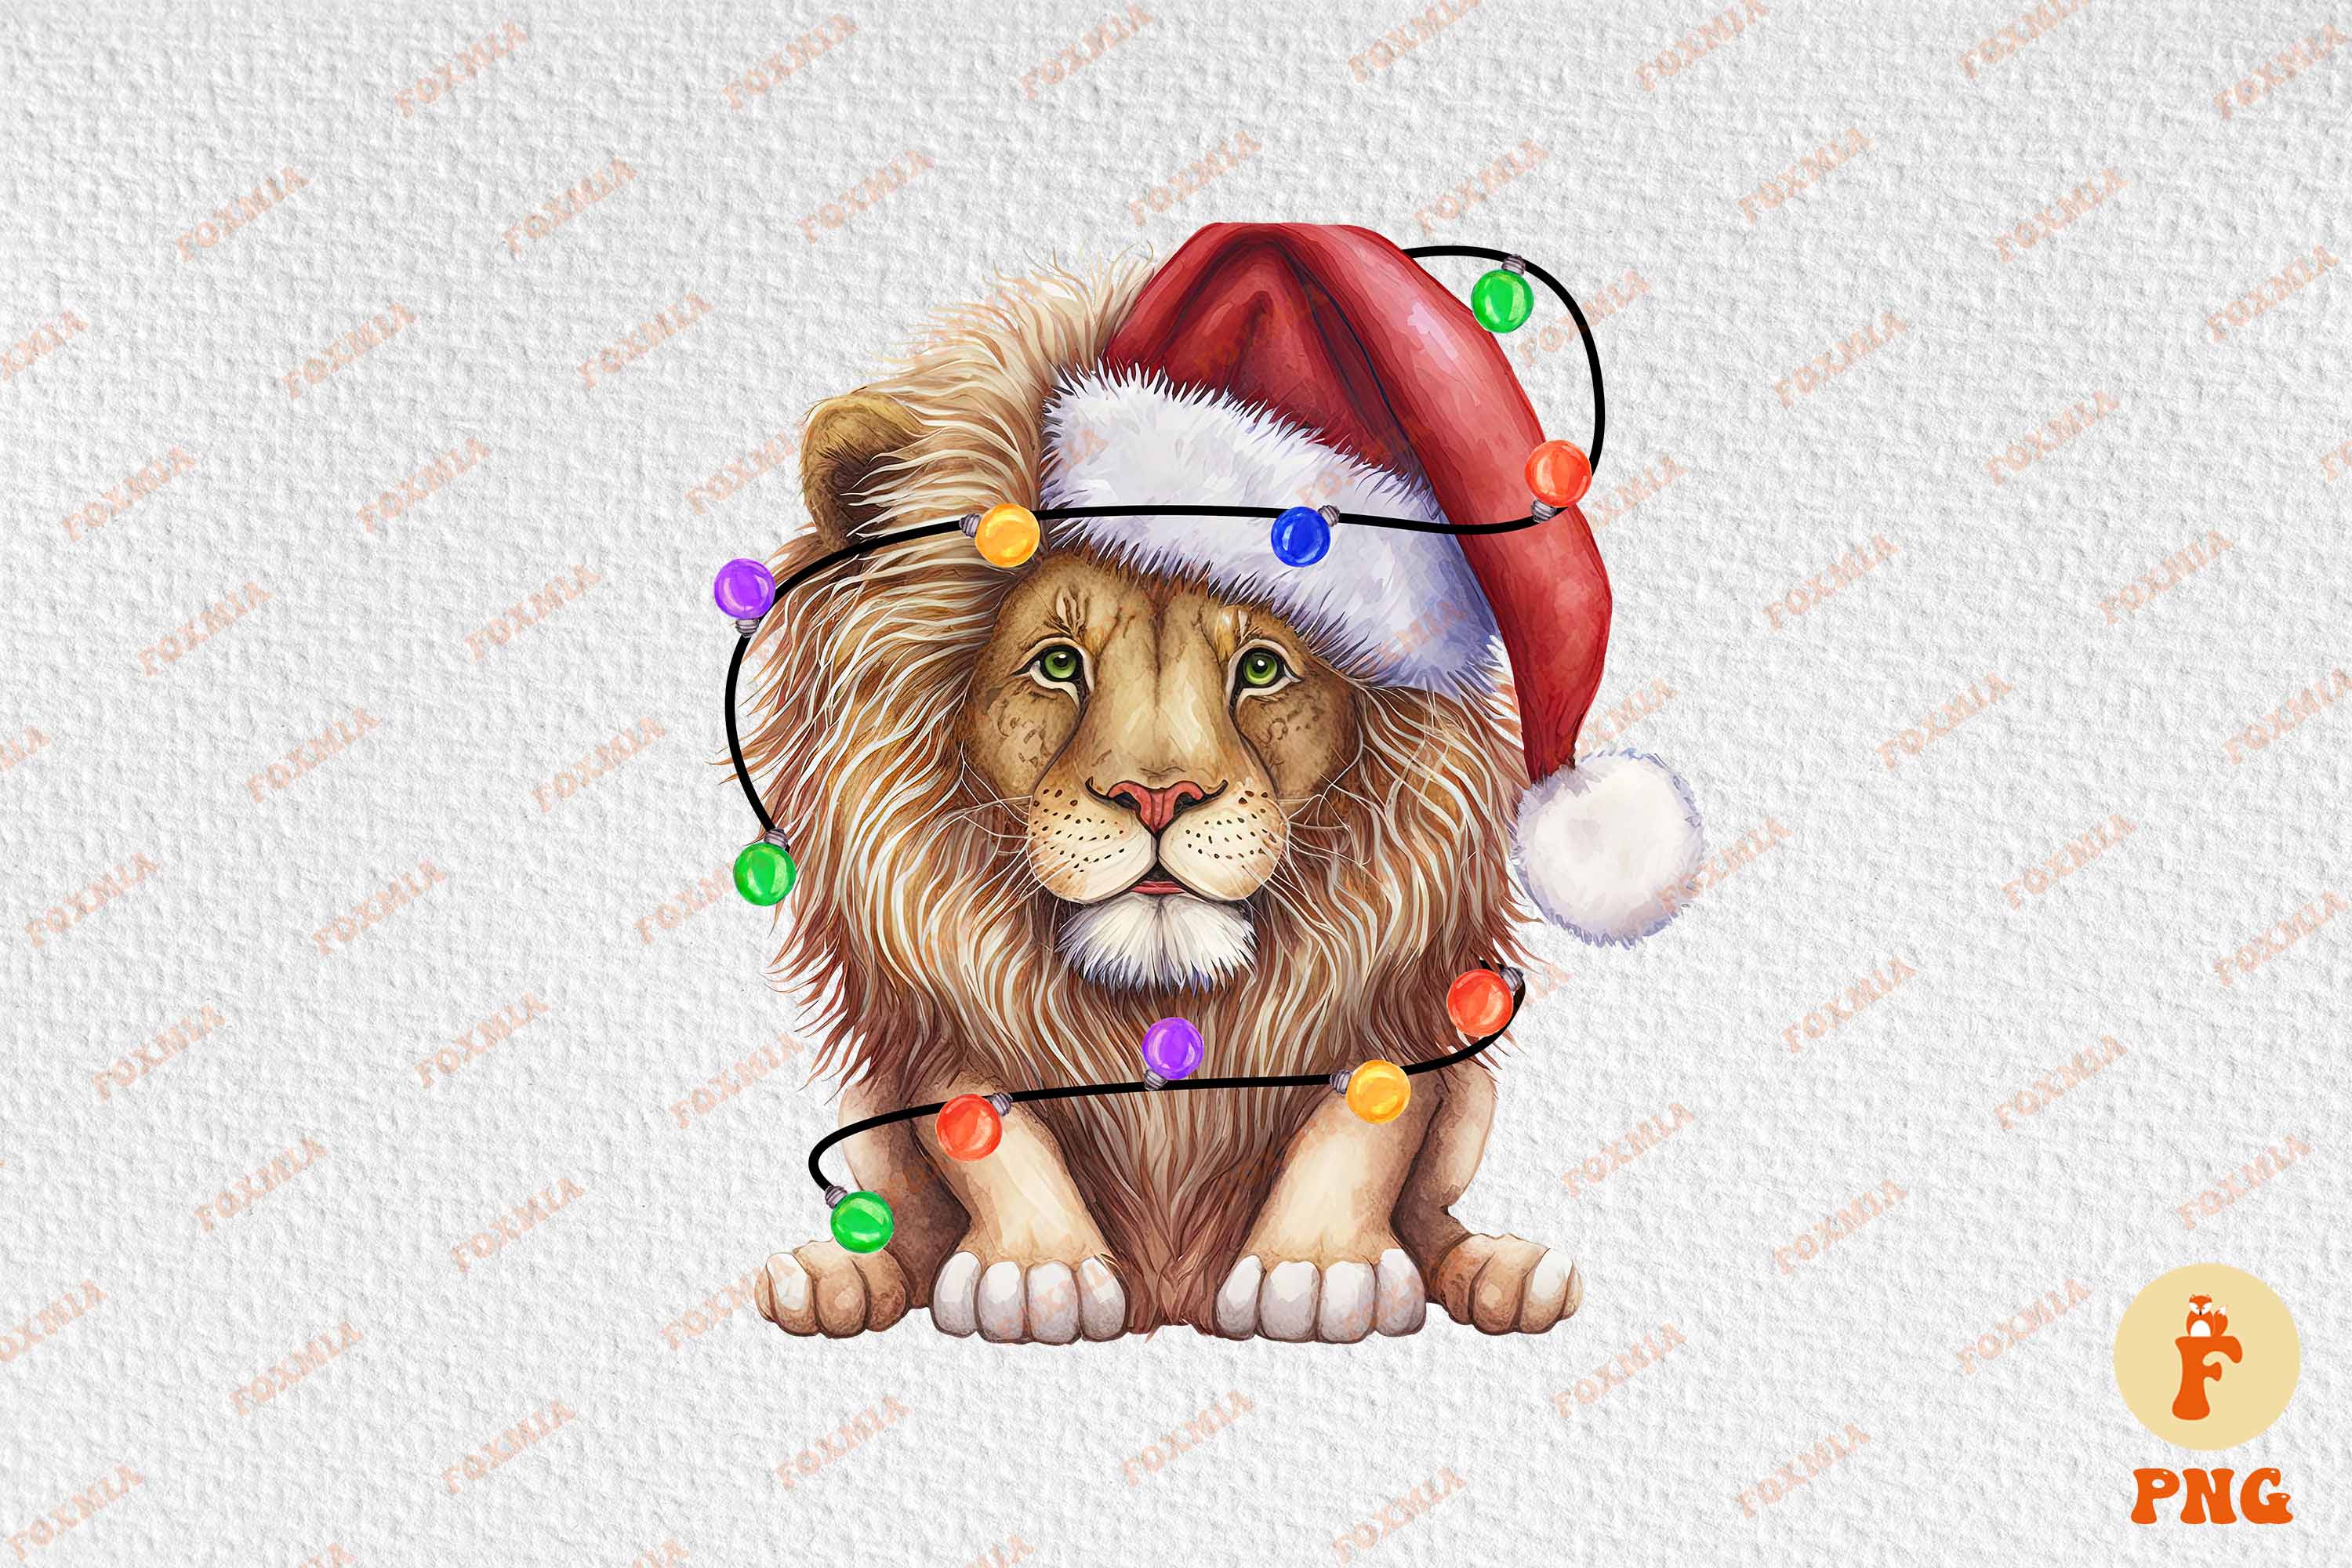 Amazing image of a lion wearing a santa hat.